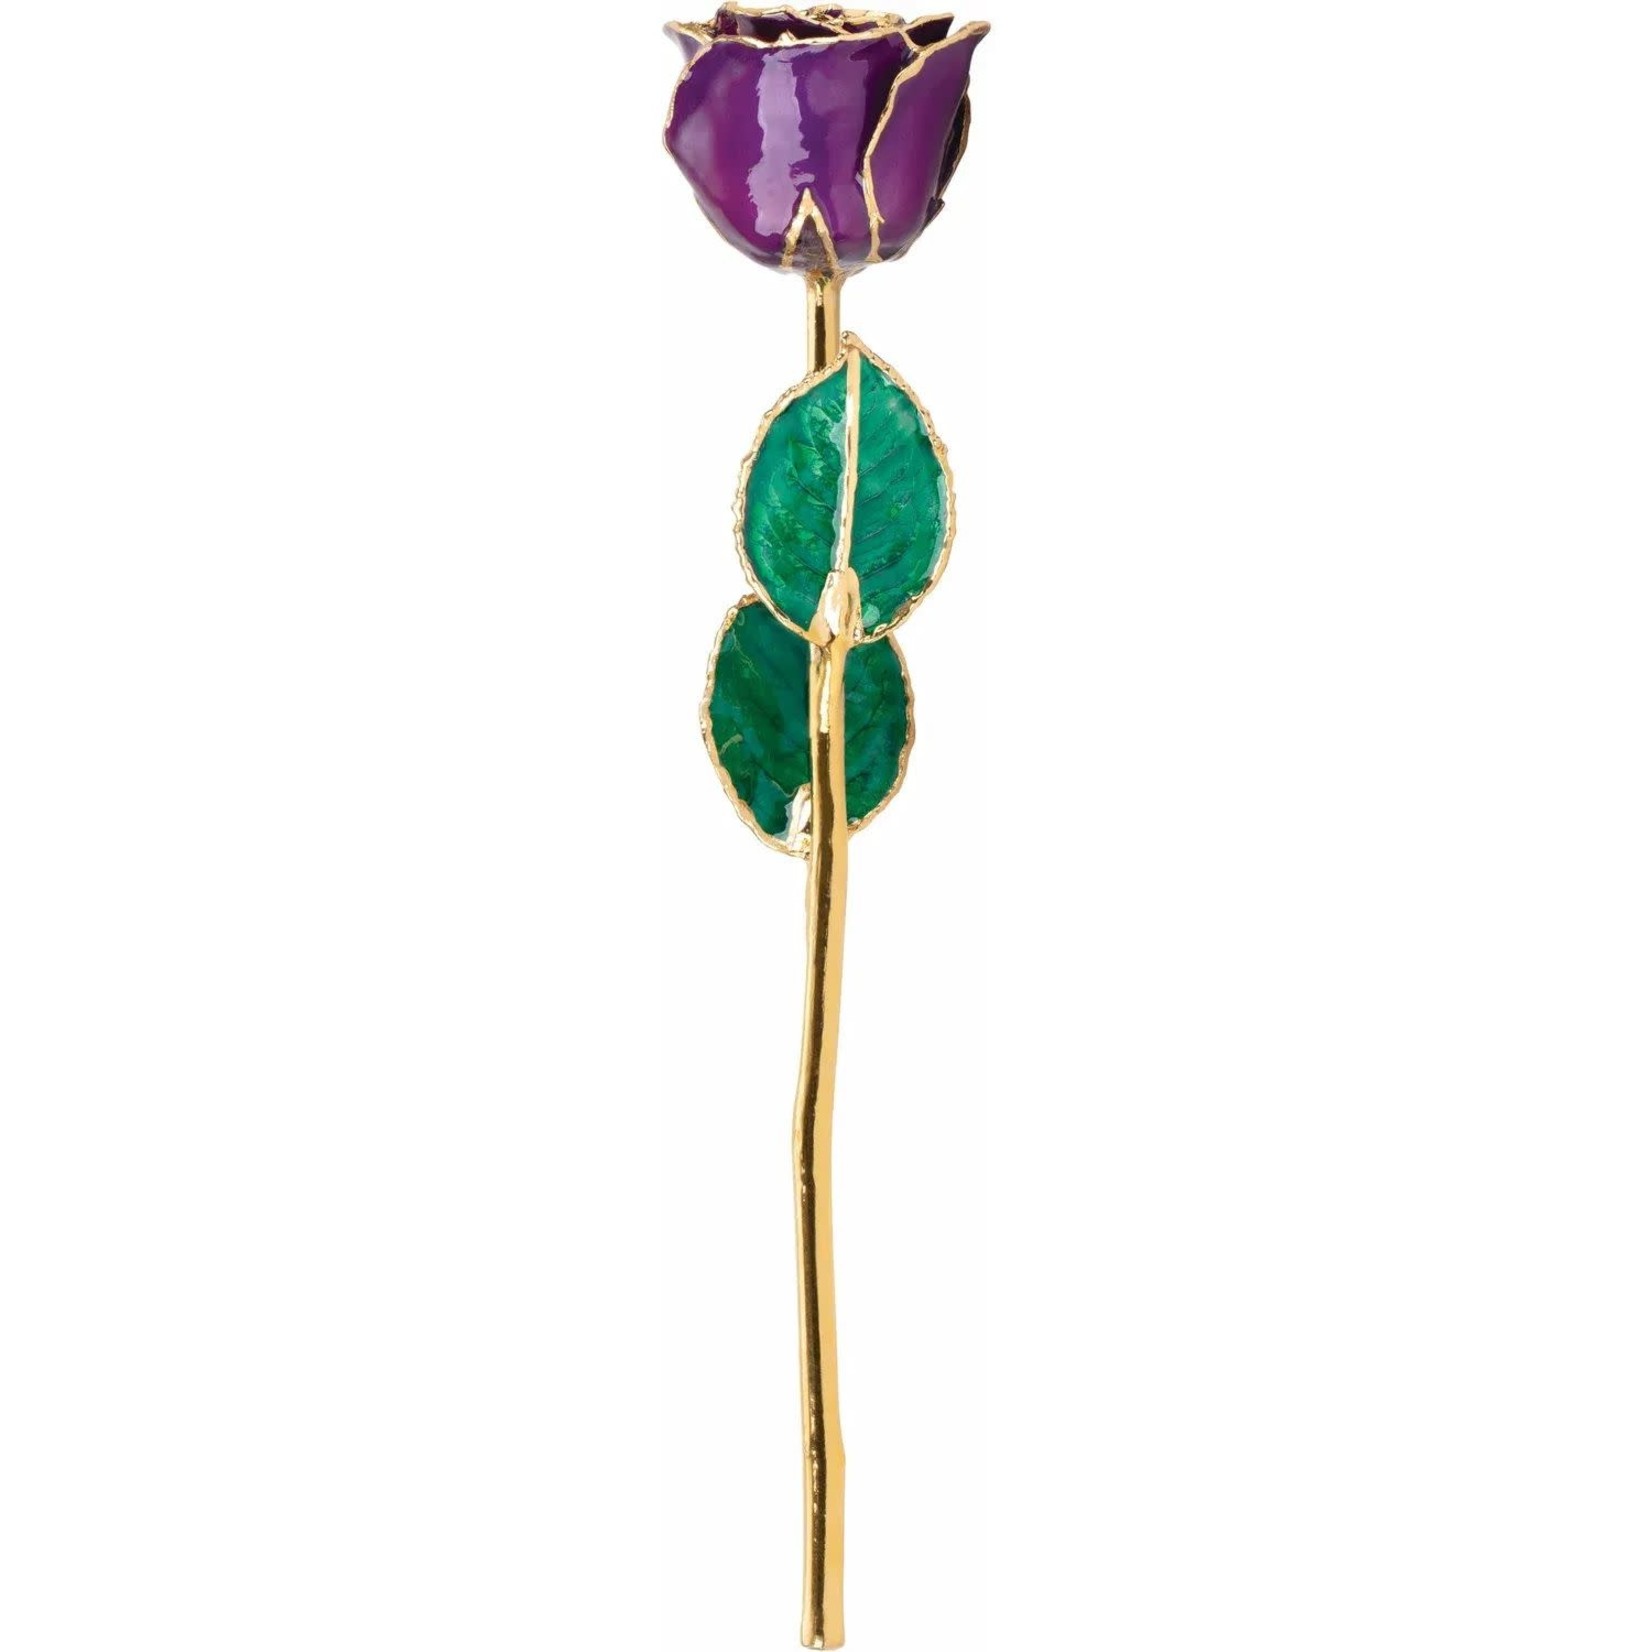 STULLER INC. Lacquer Dipped 24K Gold Trimmed Purple Rose